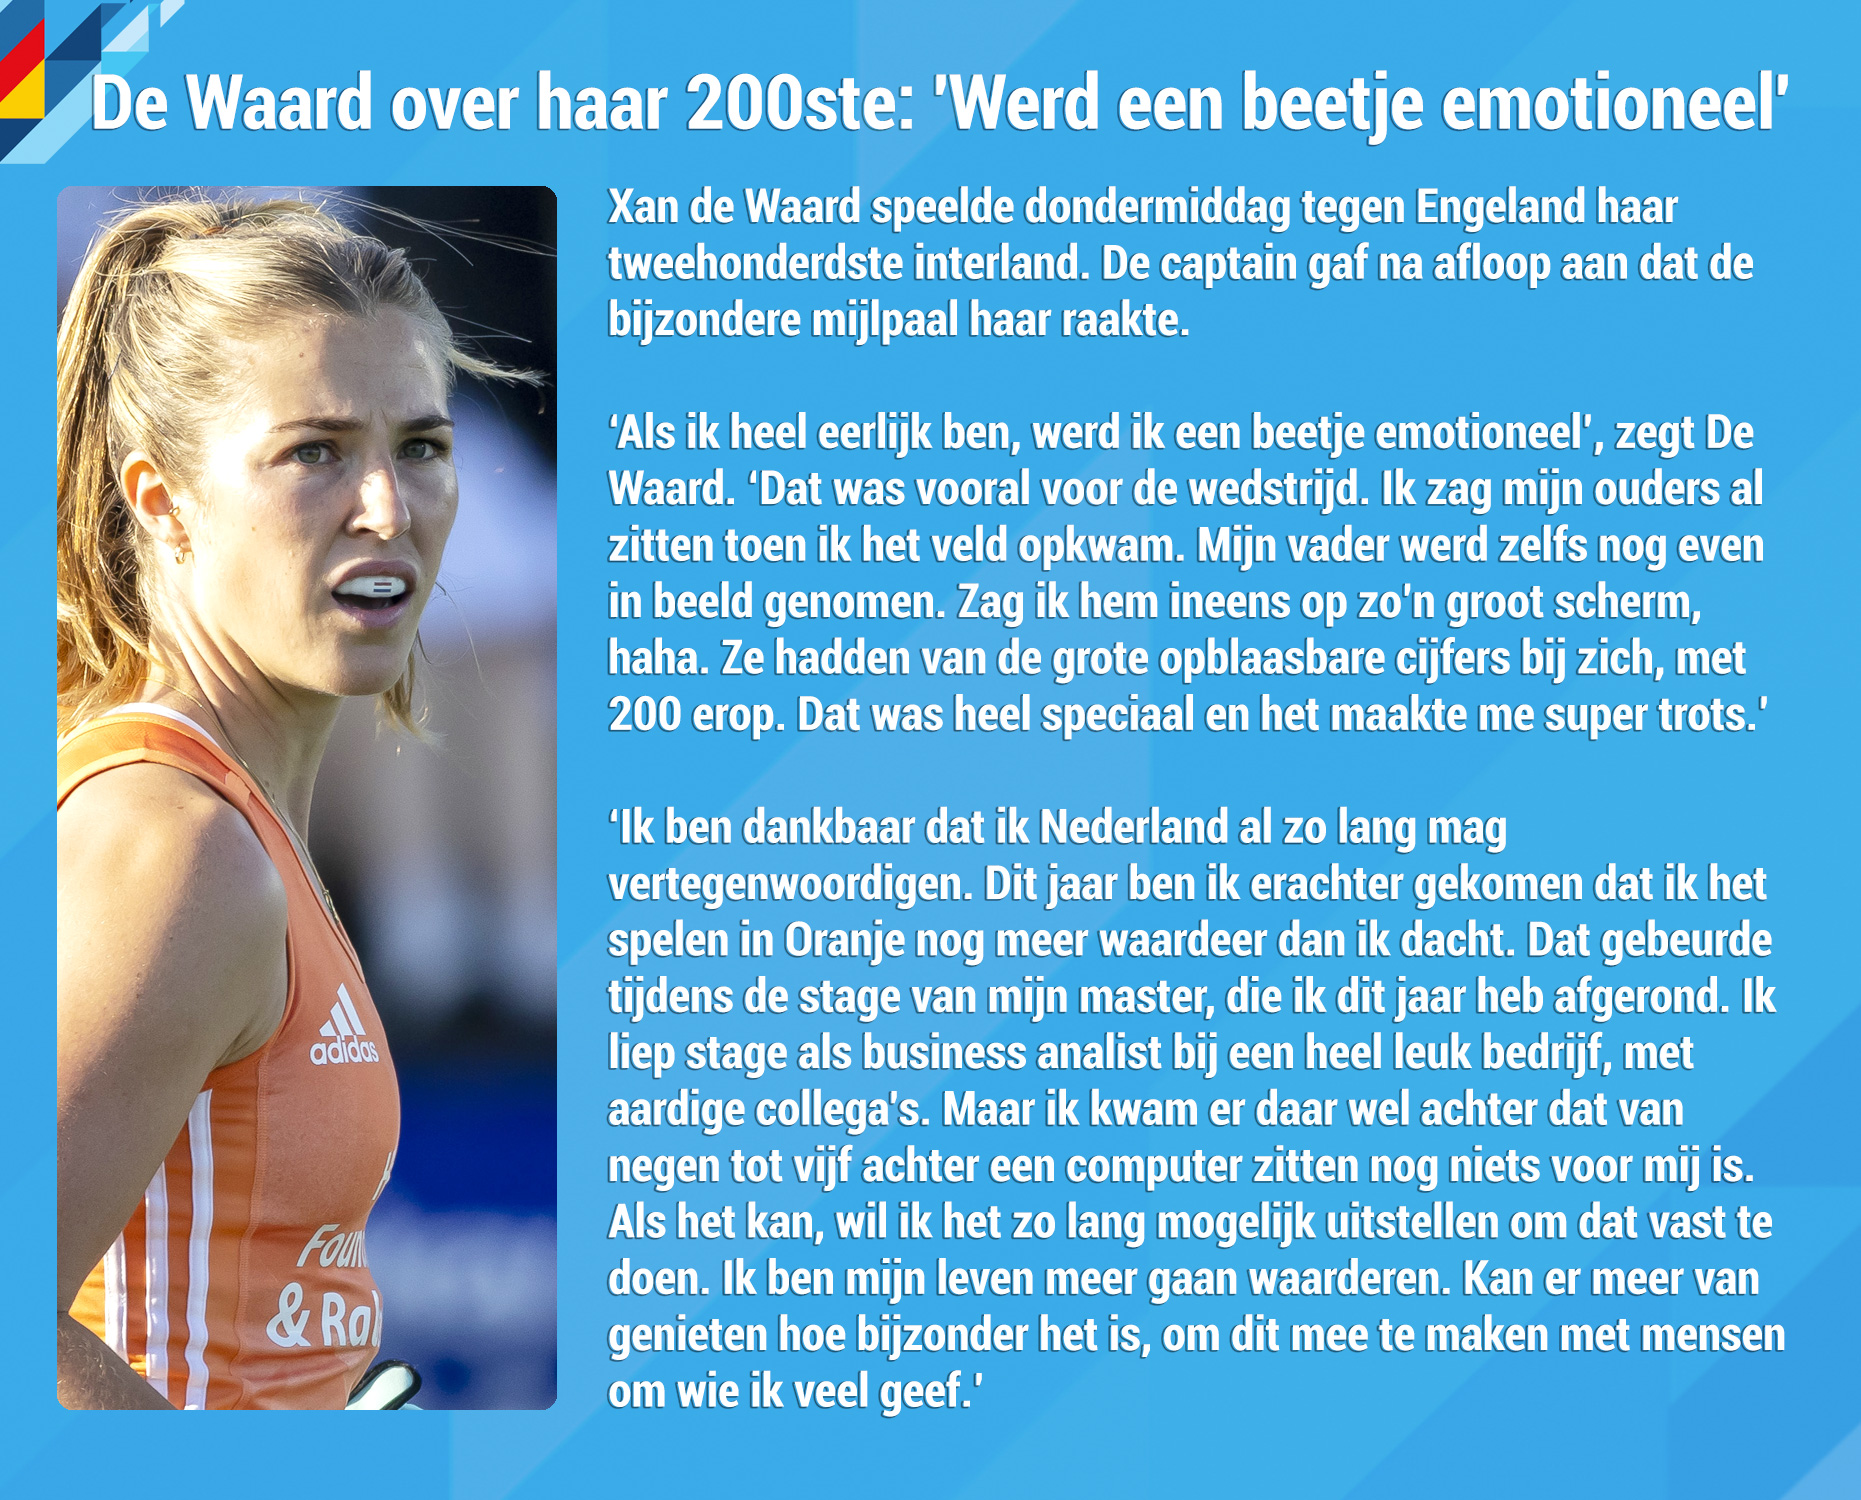 Kader DeWaard - NETHERLANDS: JOSINE KONING: 'I WORKED REALLY HARD FOR THIS' - Josine Koning was under the bar the entire match in the semi-final against England (7-0 win) . She won the competition with Anne Veenendaal. "I've worked really hard for this."